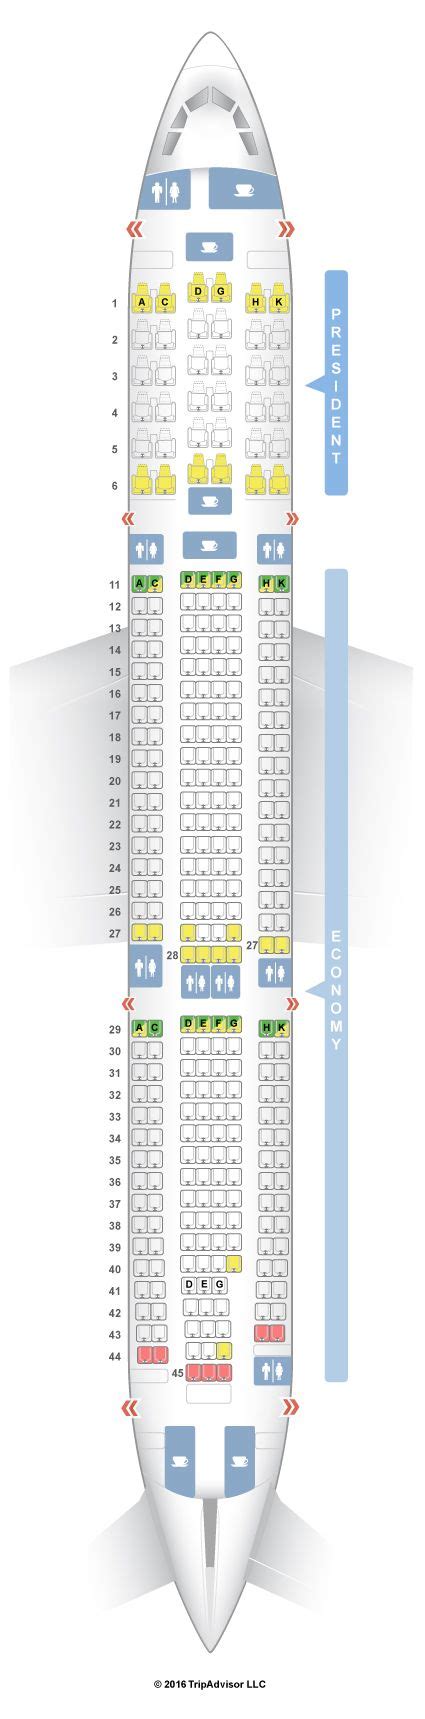 Delta Airbus A333 Seating Chart